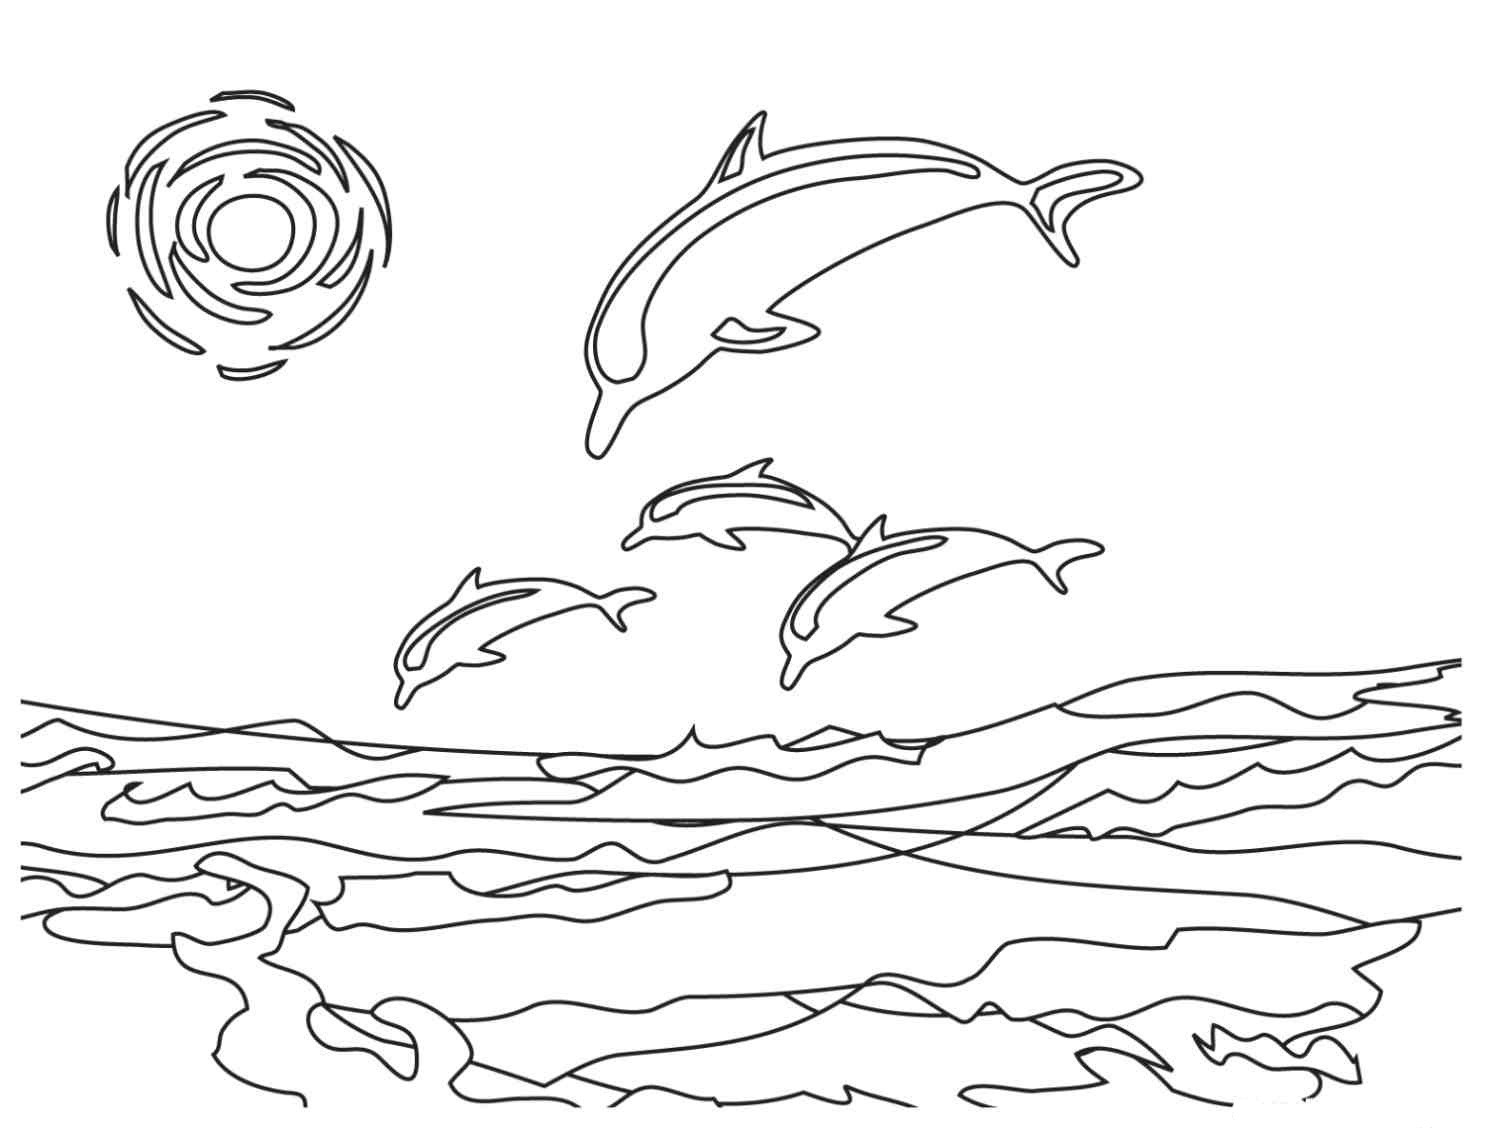 Sunset Coloring Pages For Adults
 Dolphin Coloring Pages coloringsuite